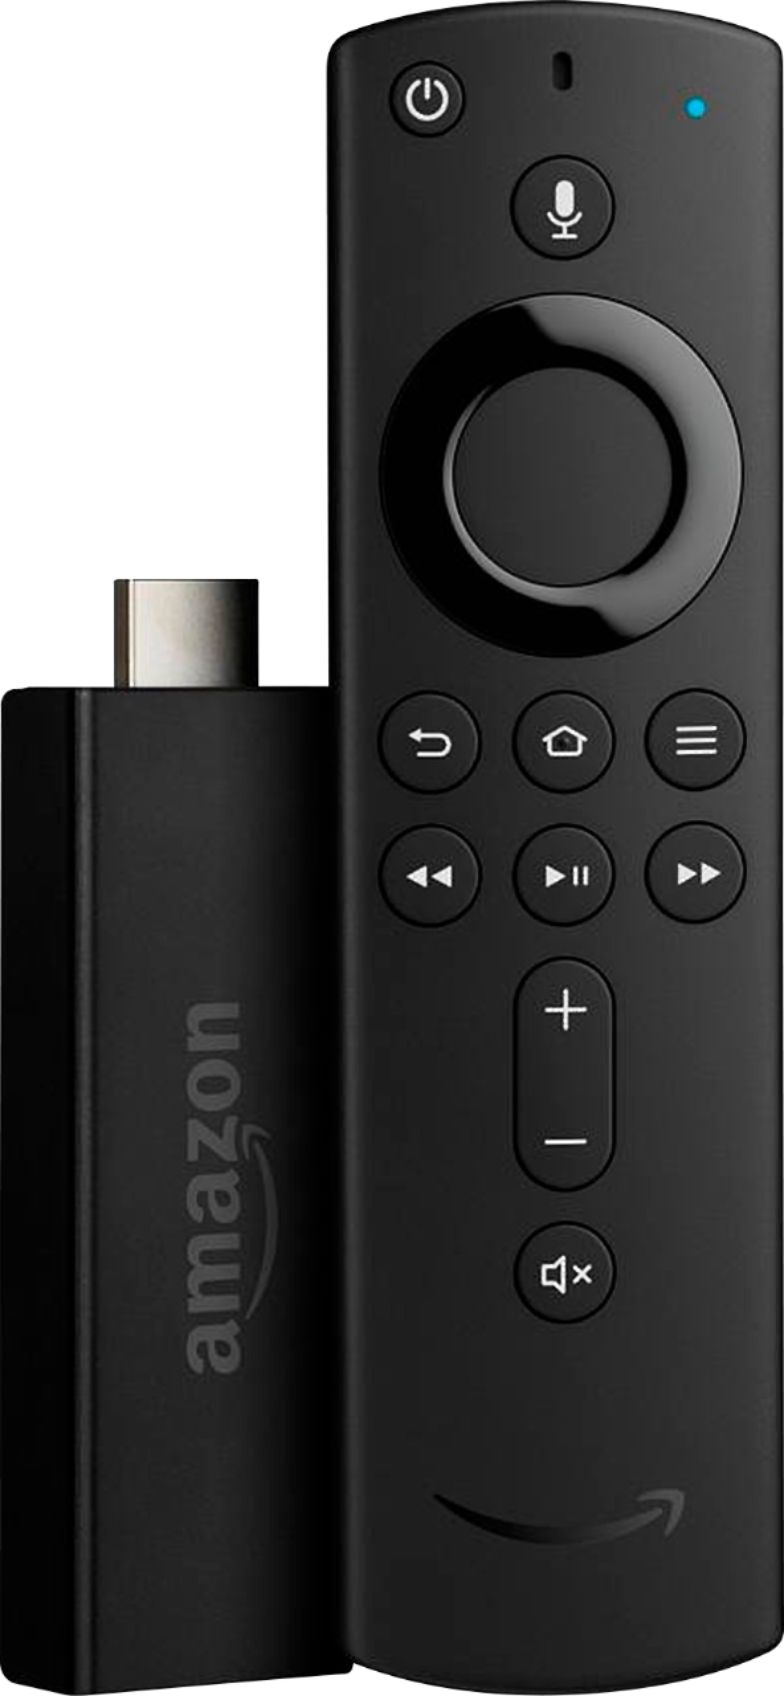 what does the amazon fire stick come with